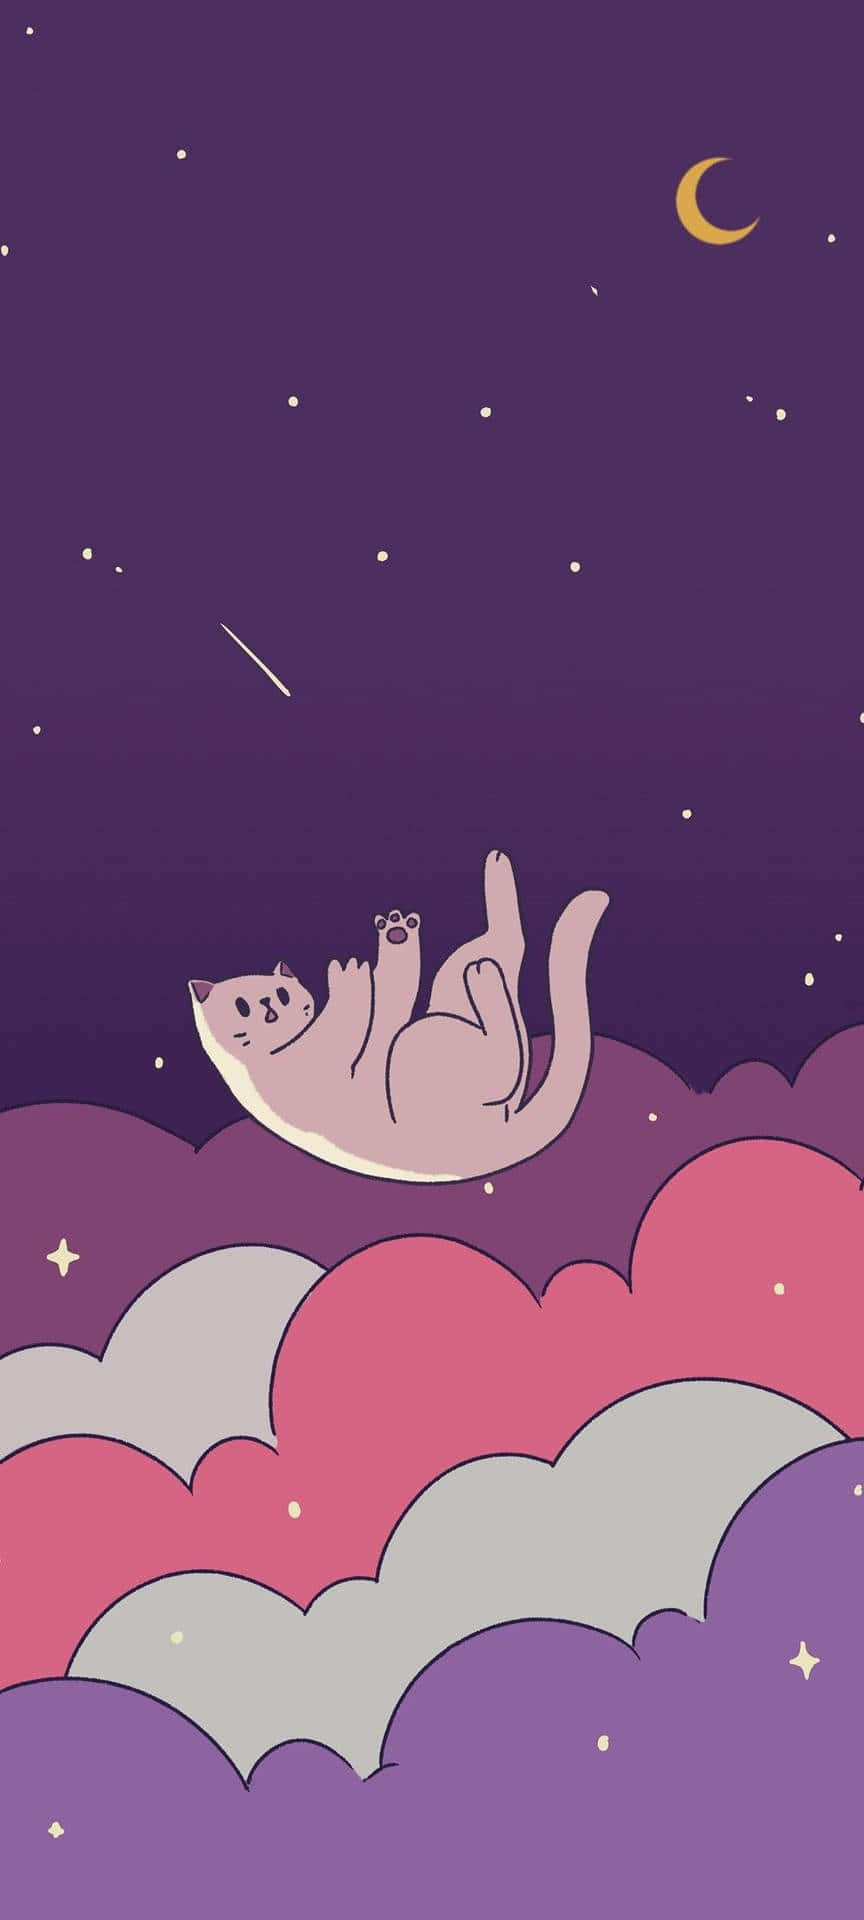 Dreamy Cat On Clouds Aesthetic Wallpaper